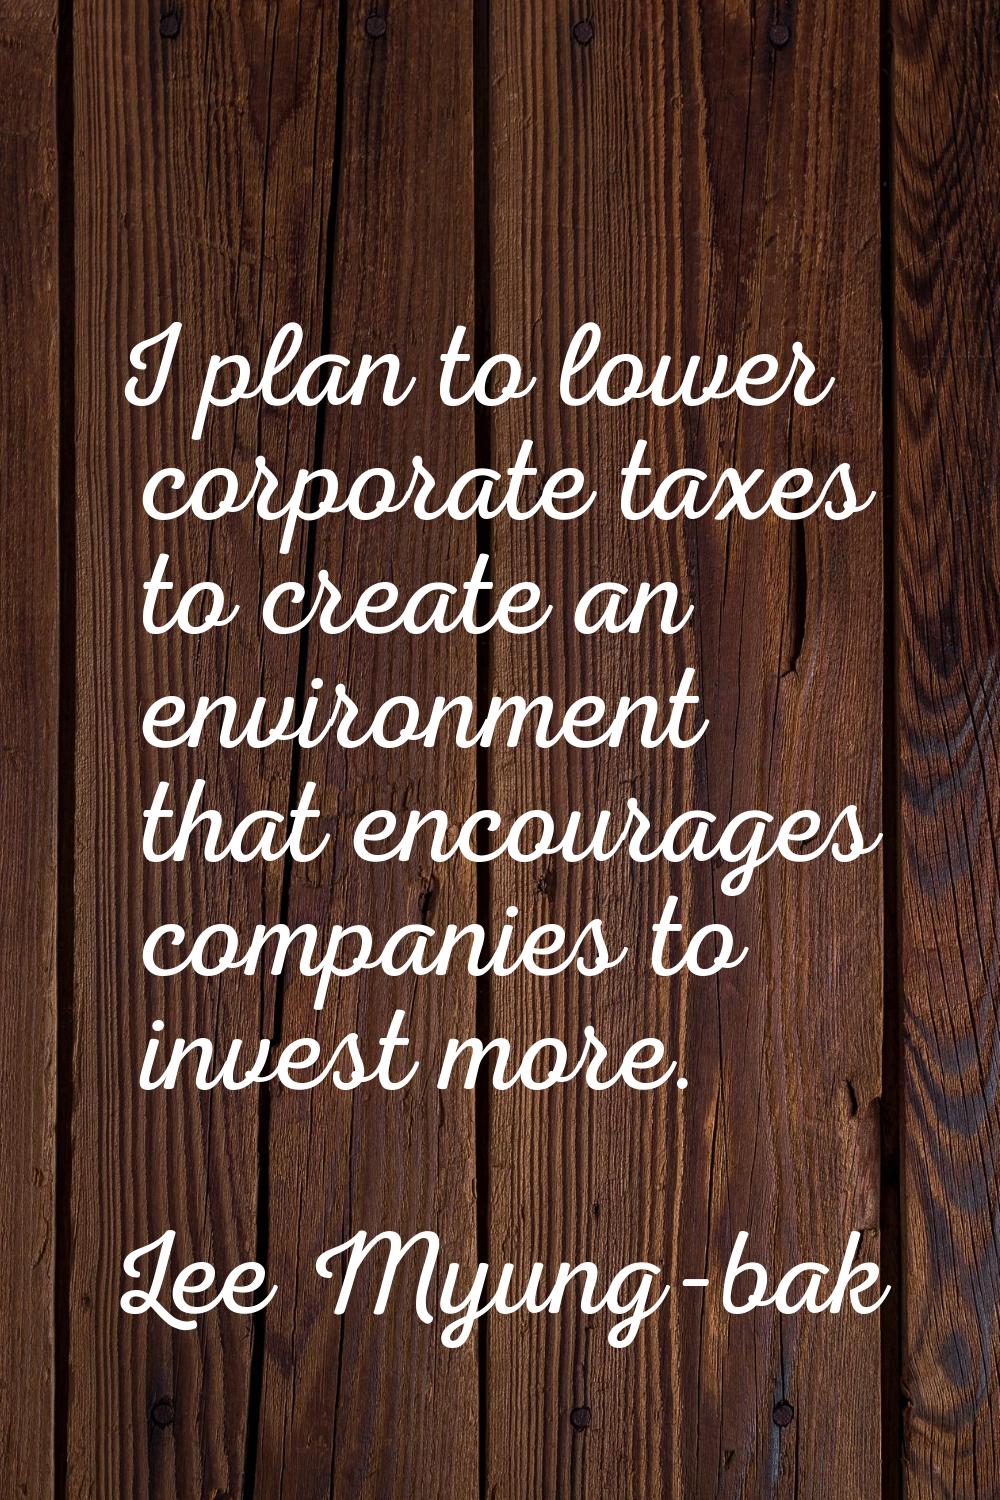 I plan to lower corporate taxes to create an environment that encourages companies to invest more.